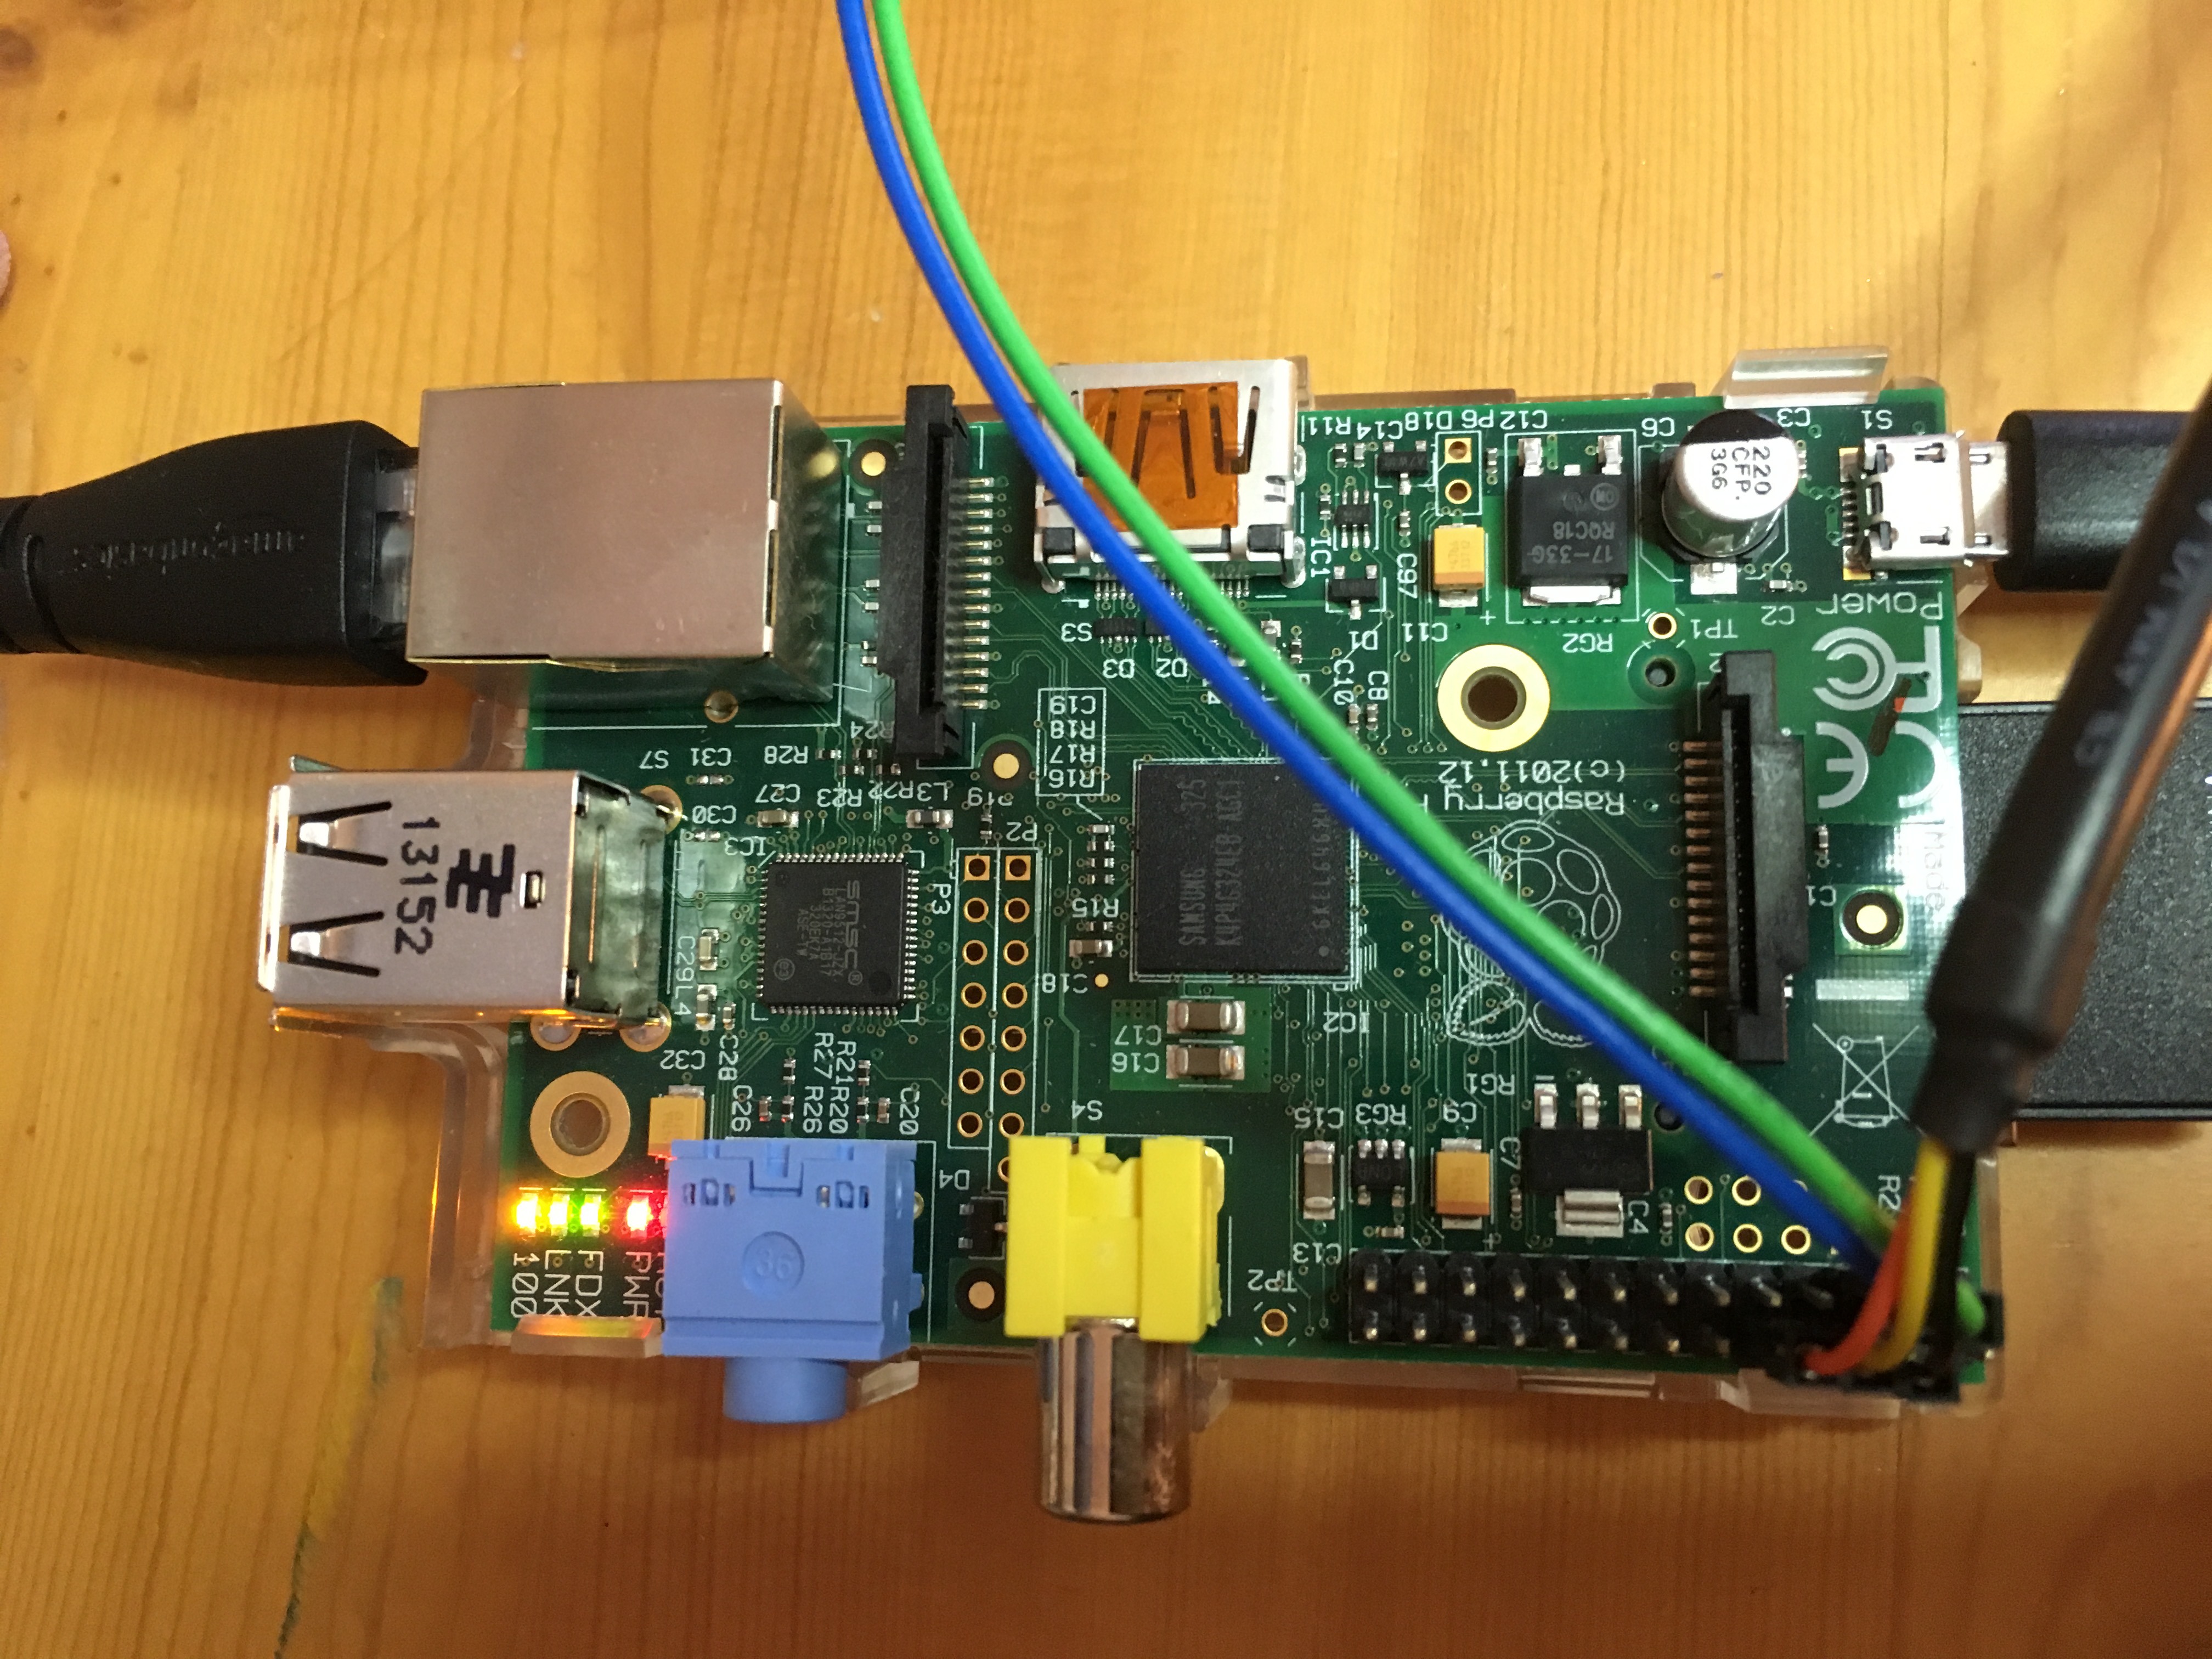 Raspberry pi showing UART and I2C connections